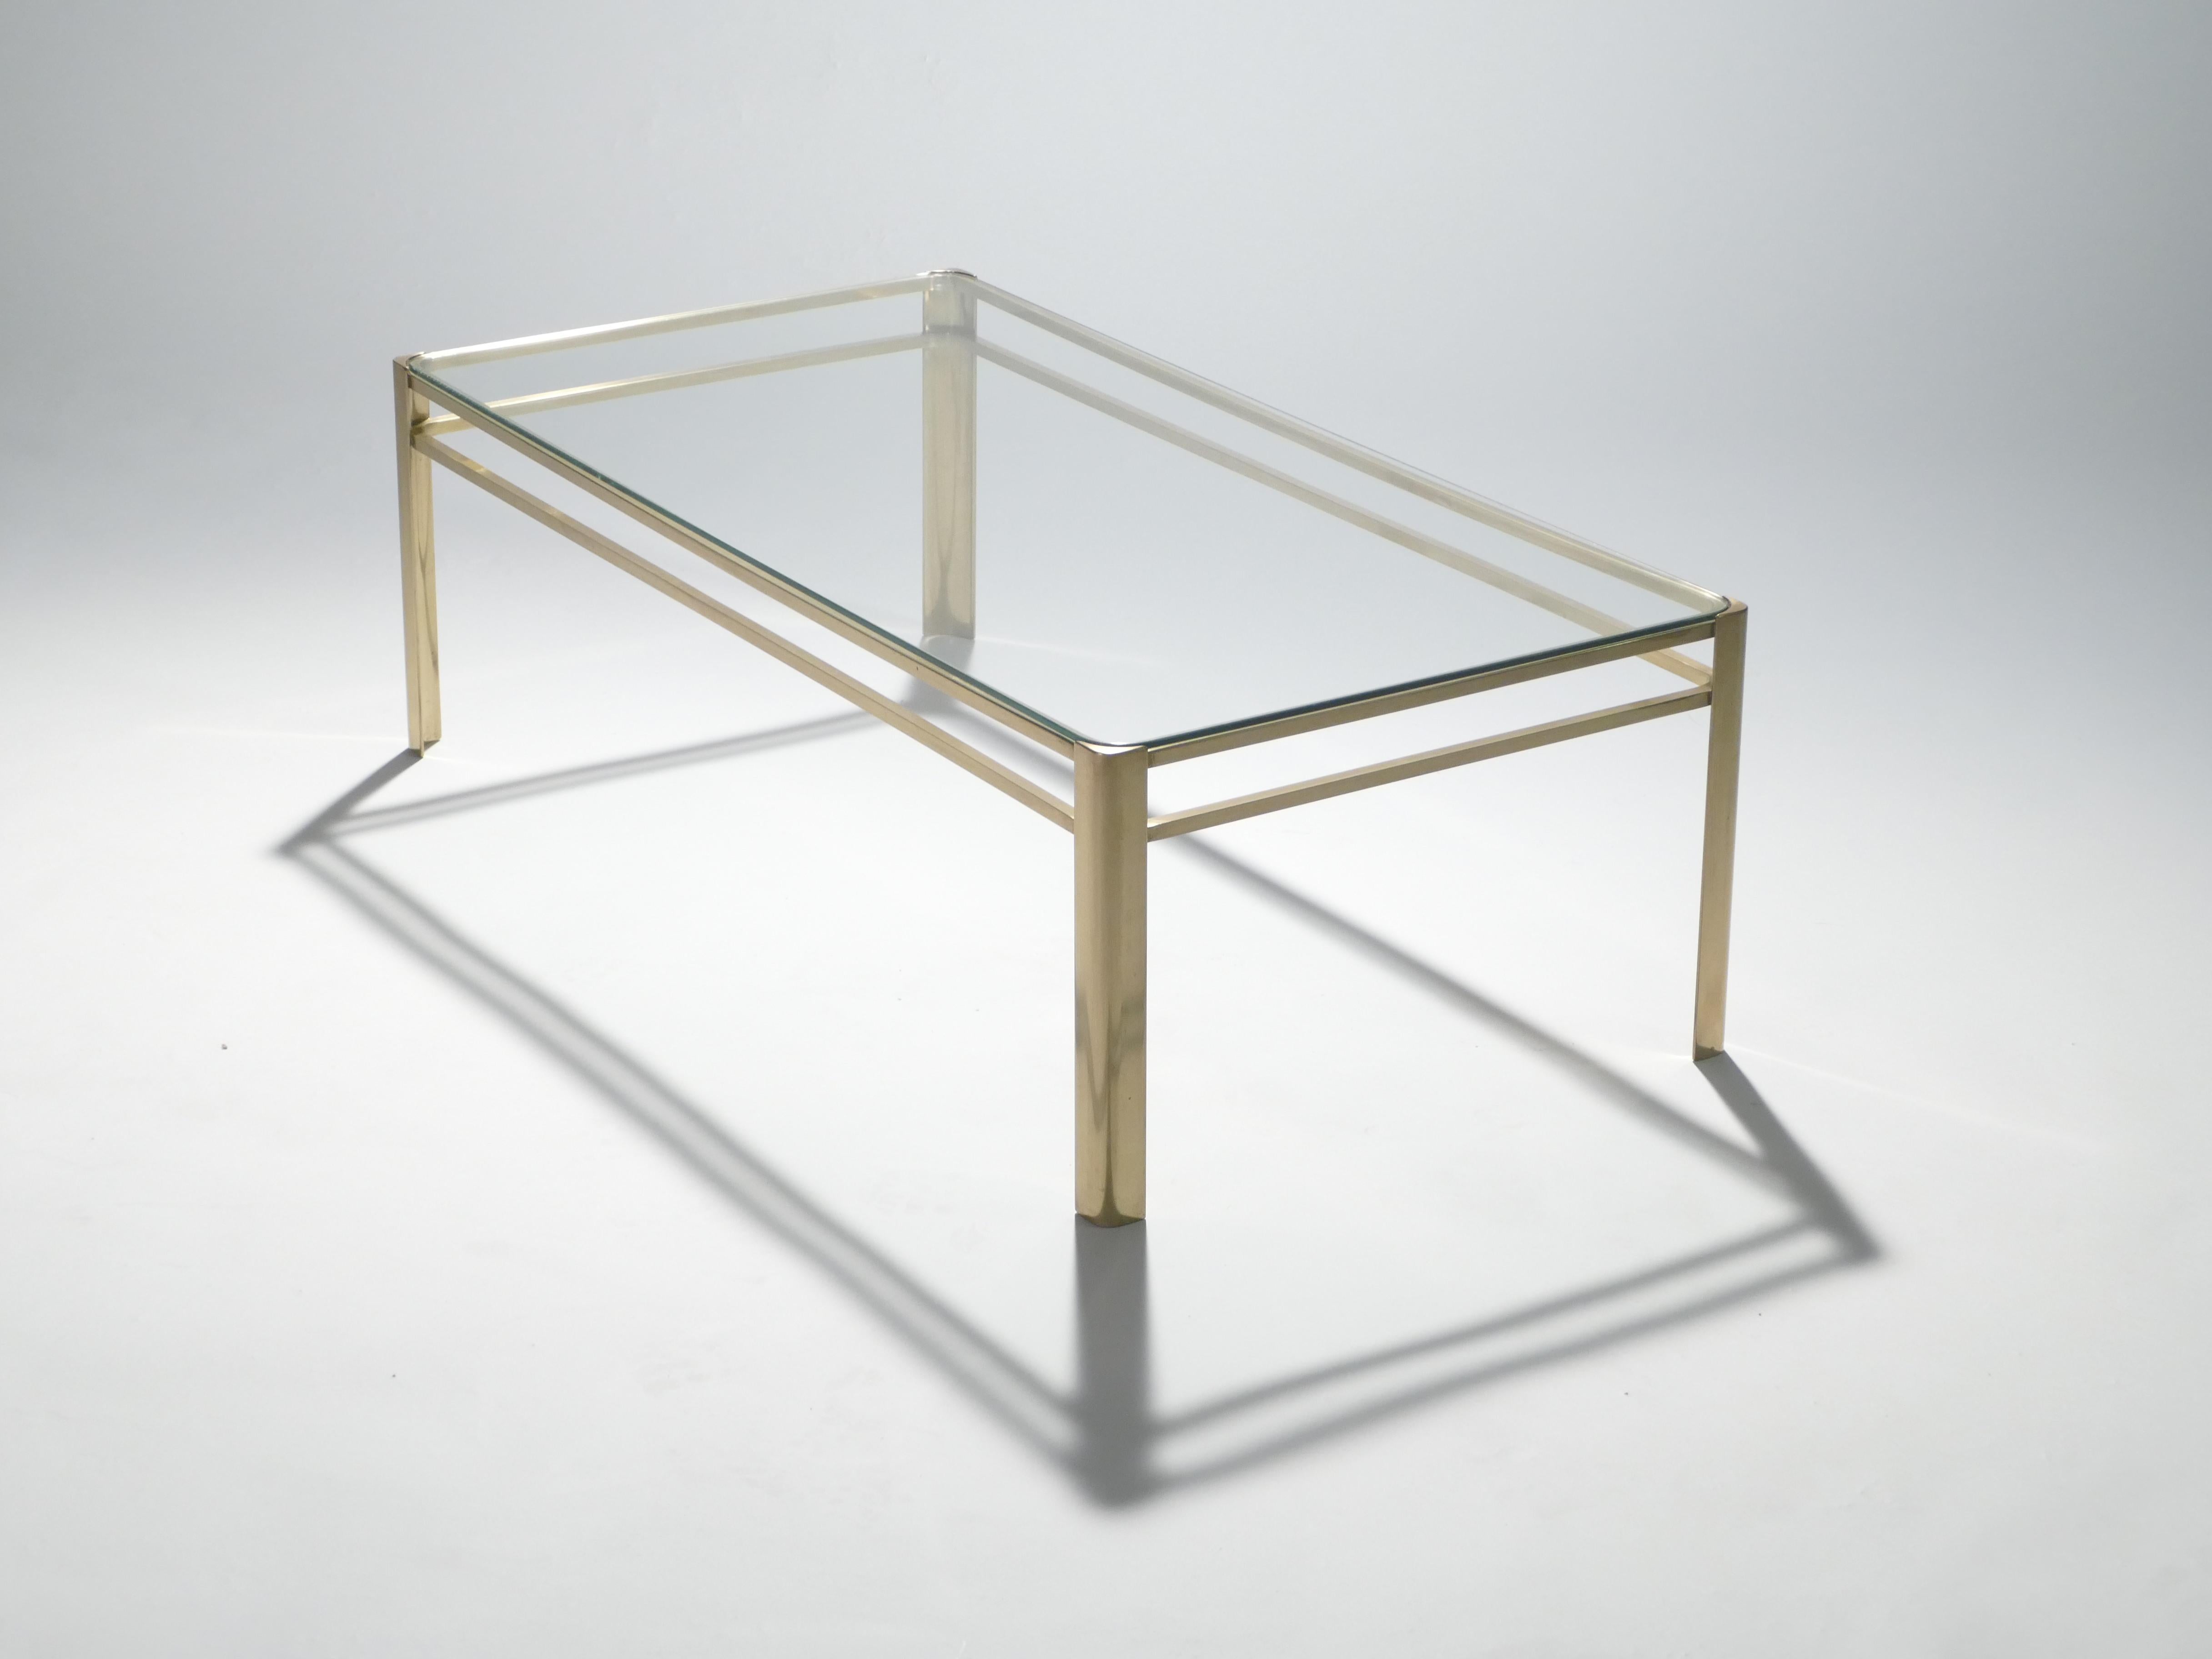 Midcentury Bronze Coffee Table by Jacques Quinet for Broncz, 1960s (Französisch)